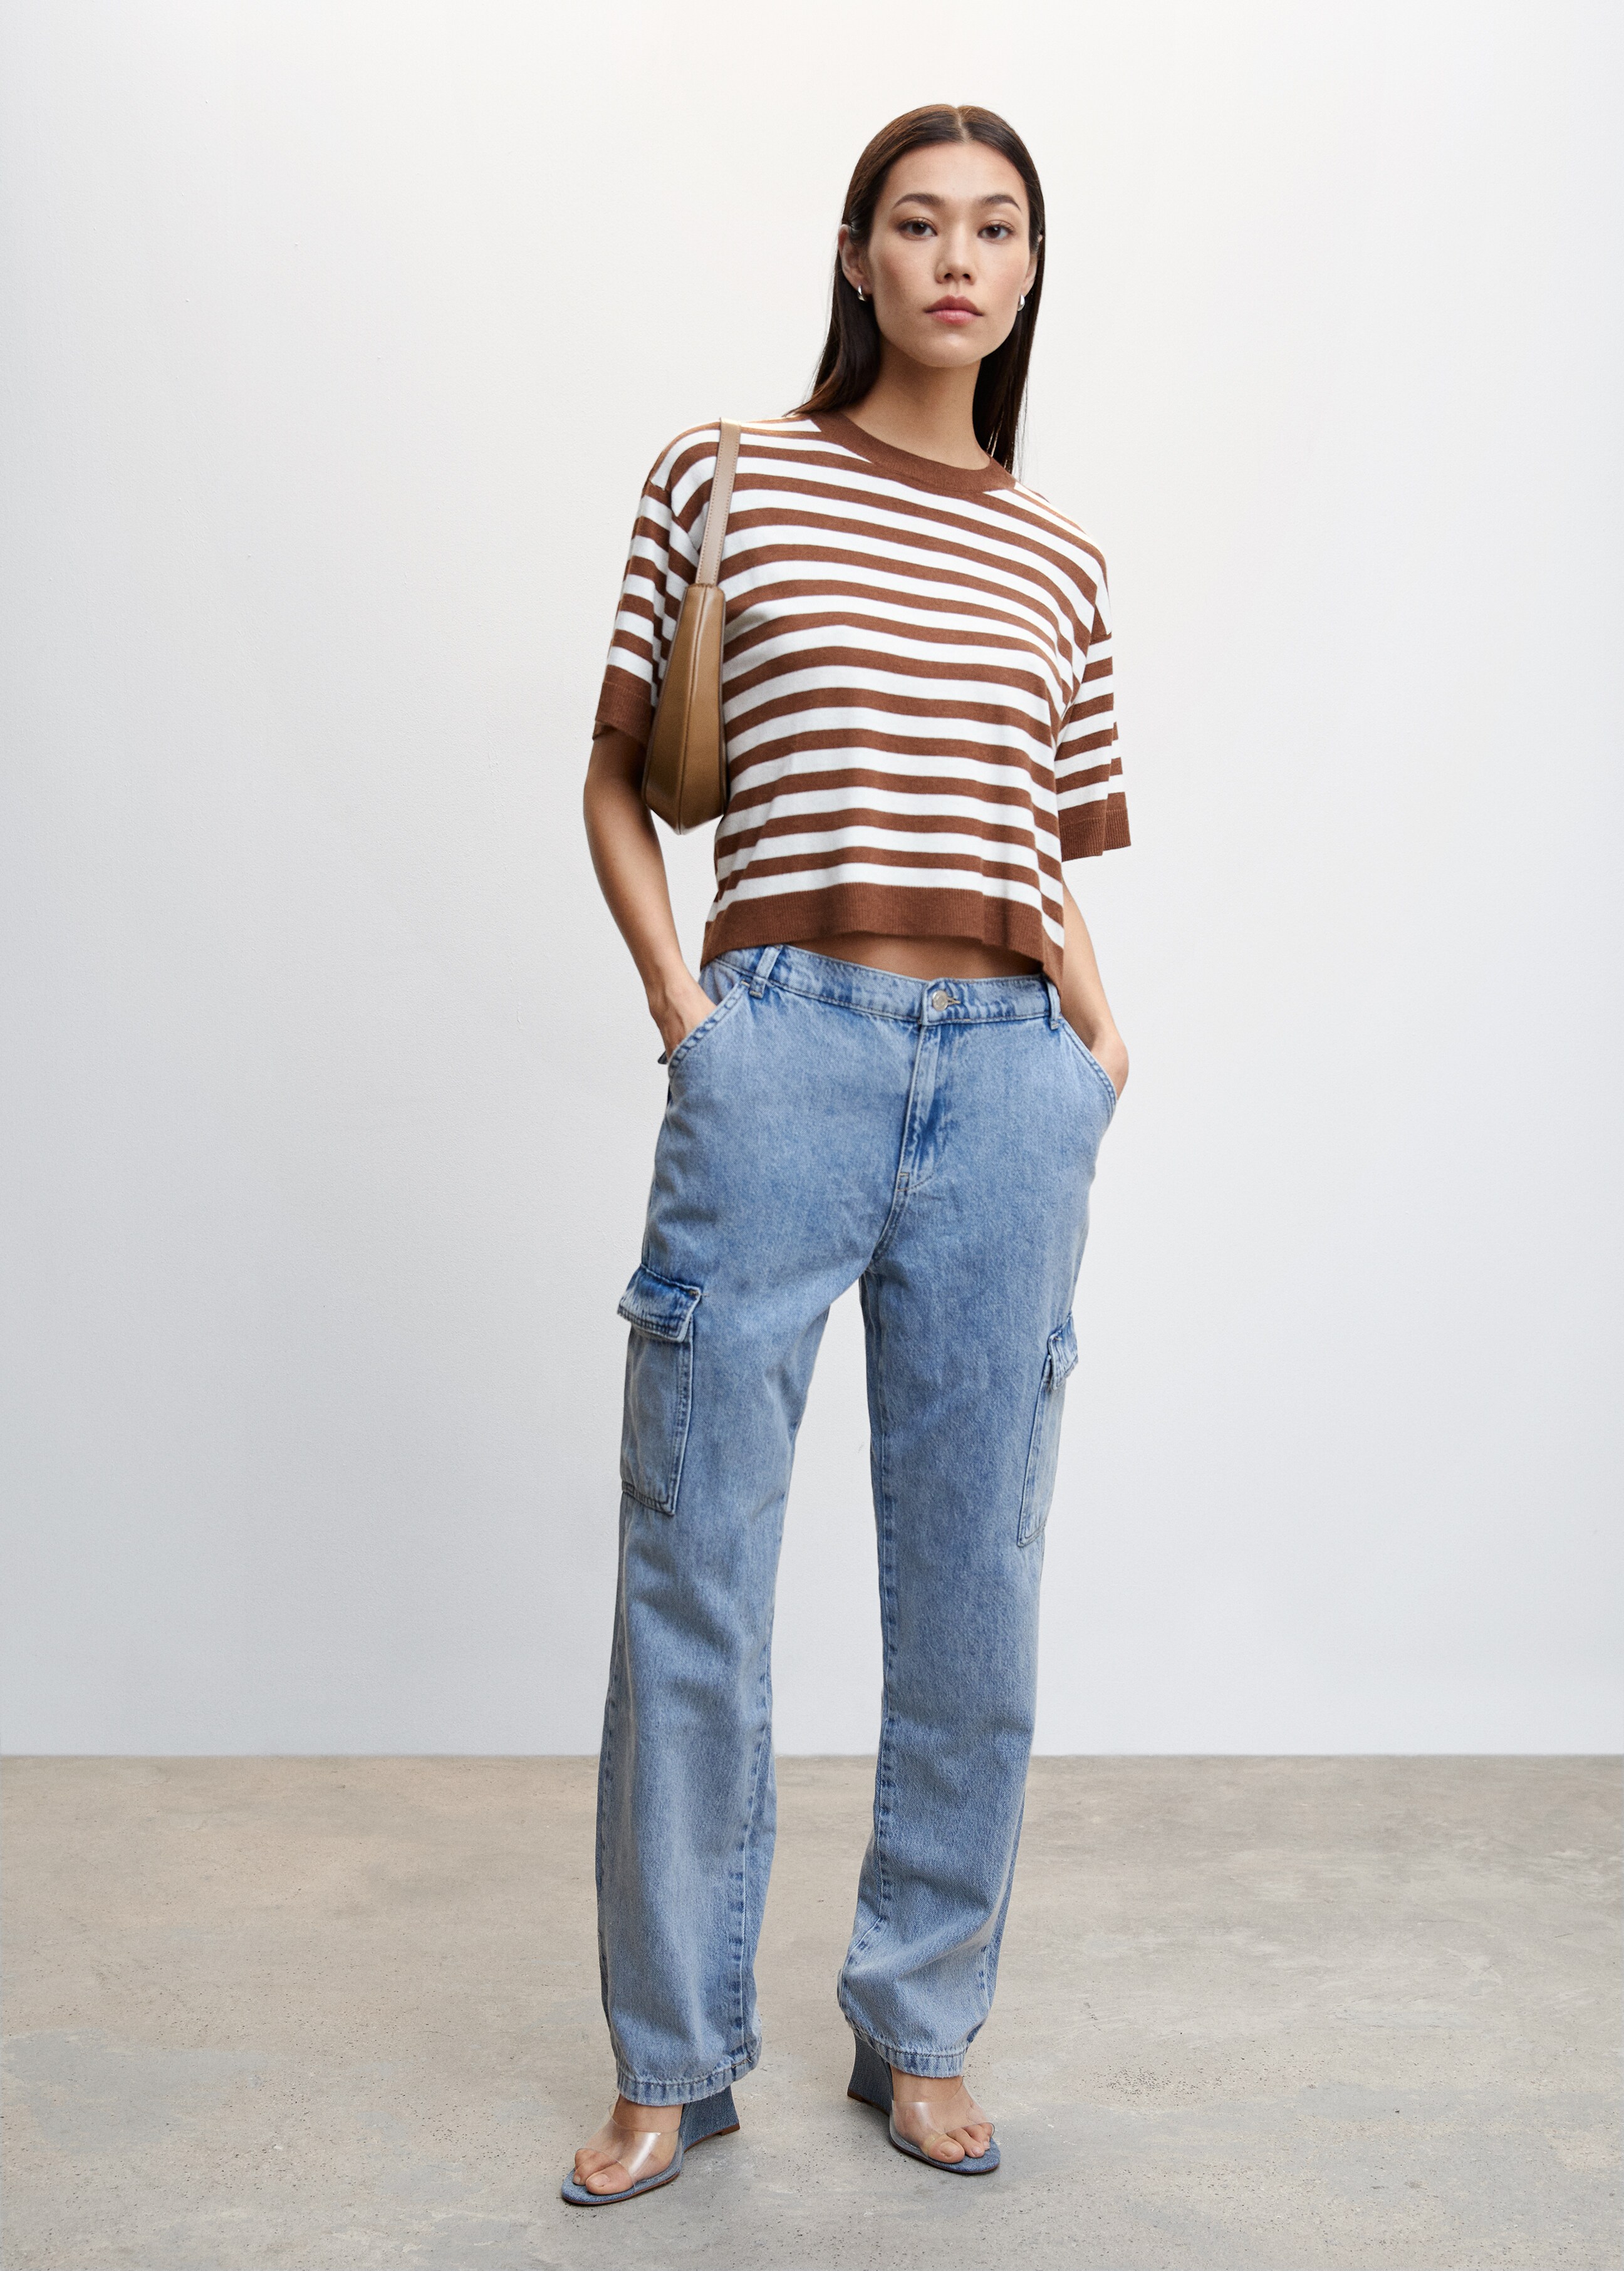 Striped short-sleeved sweater - General plane